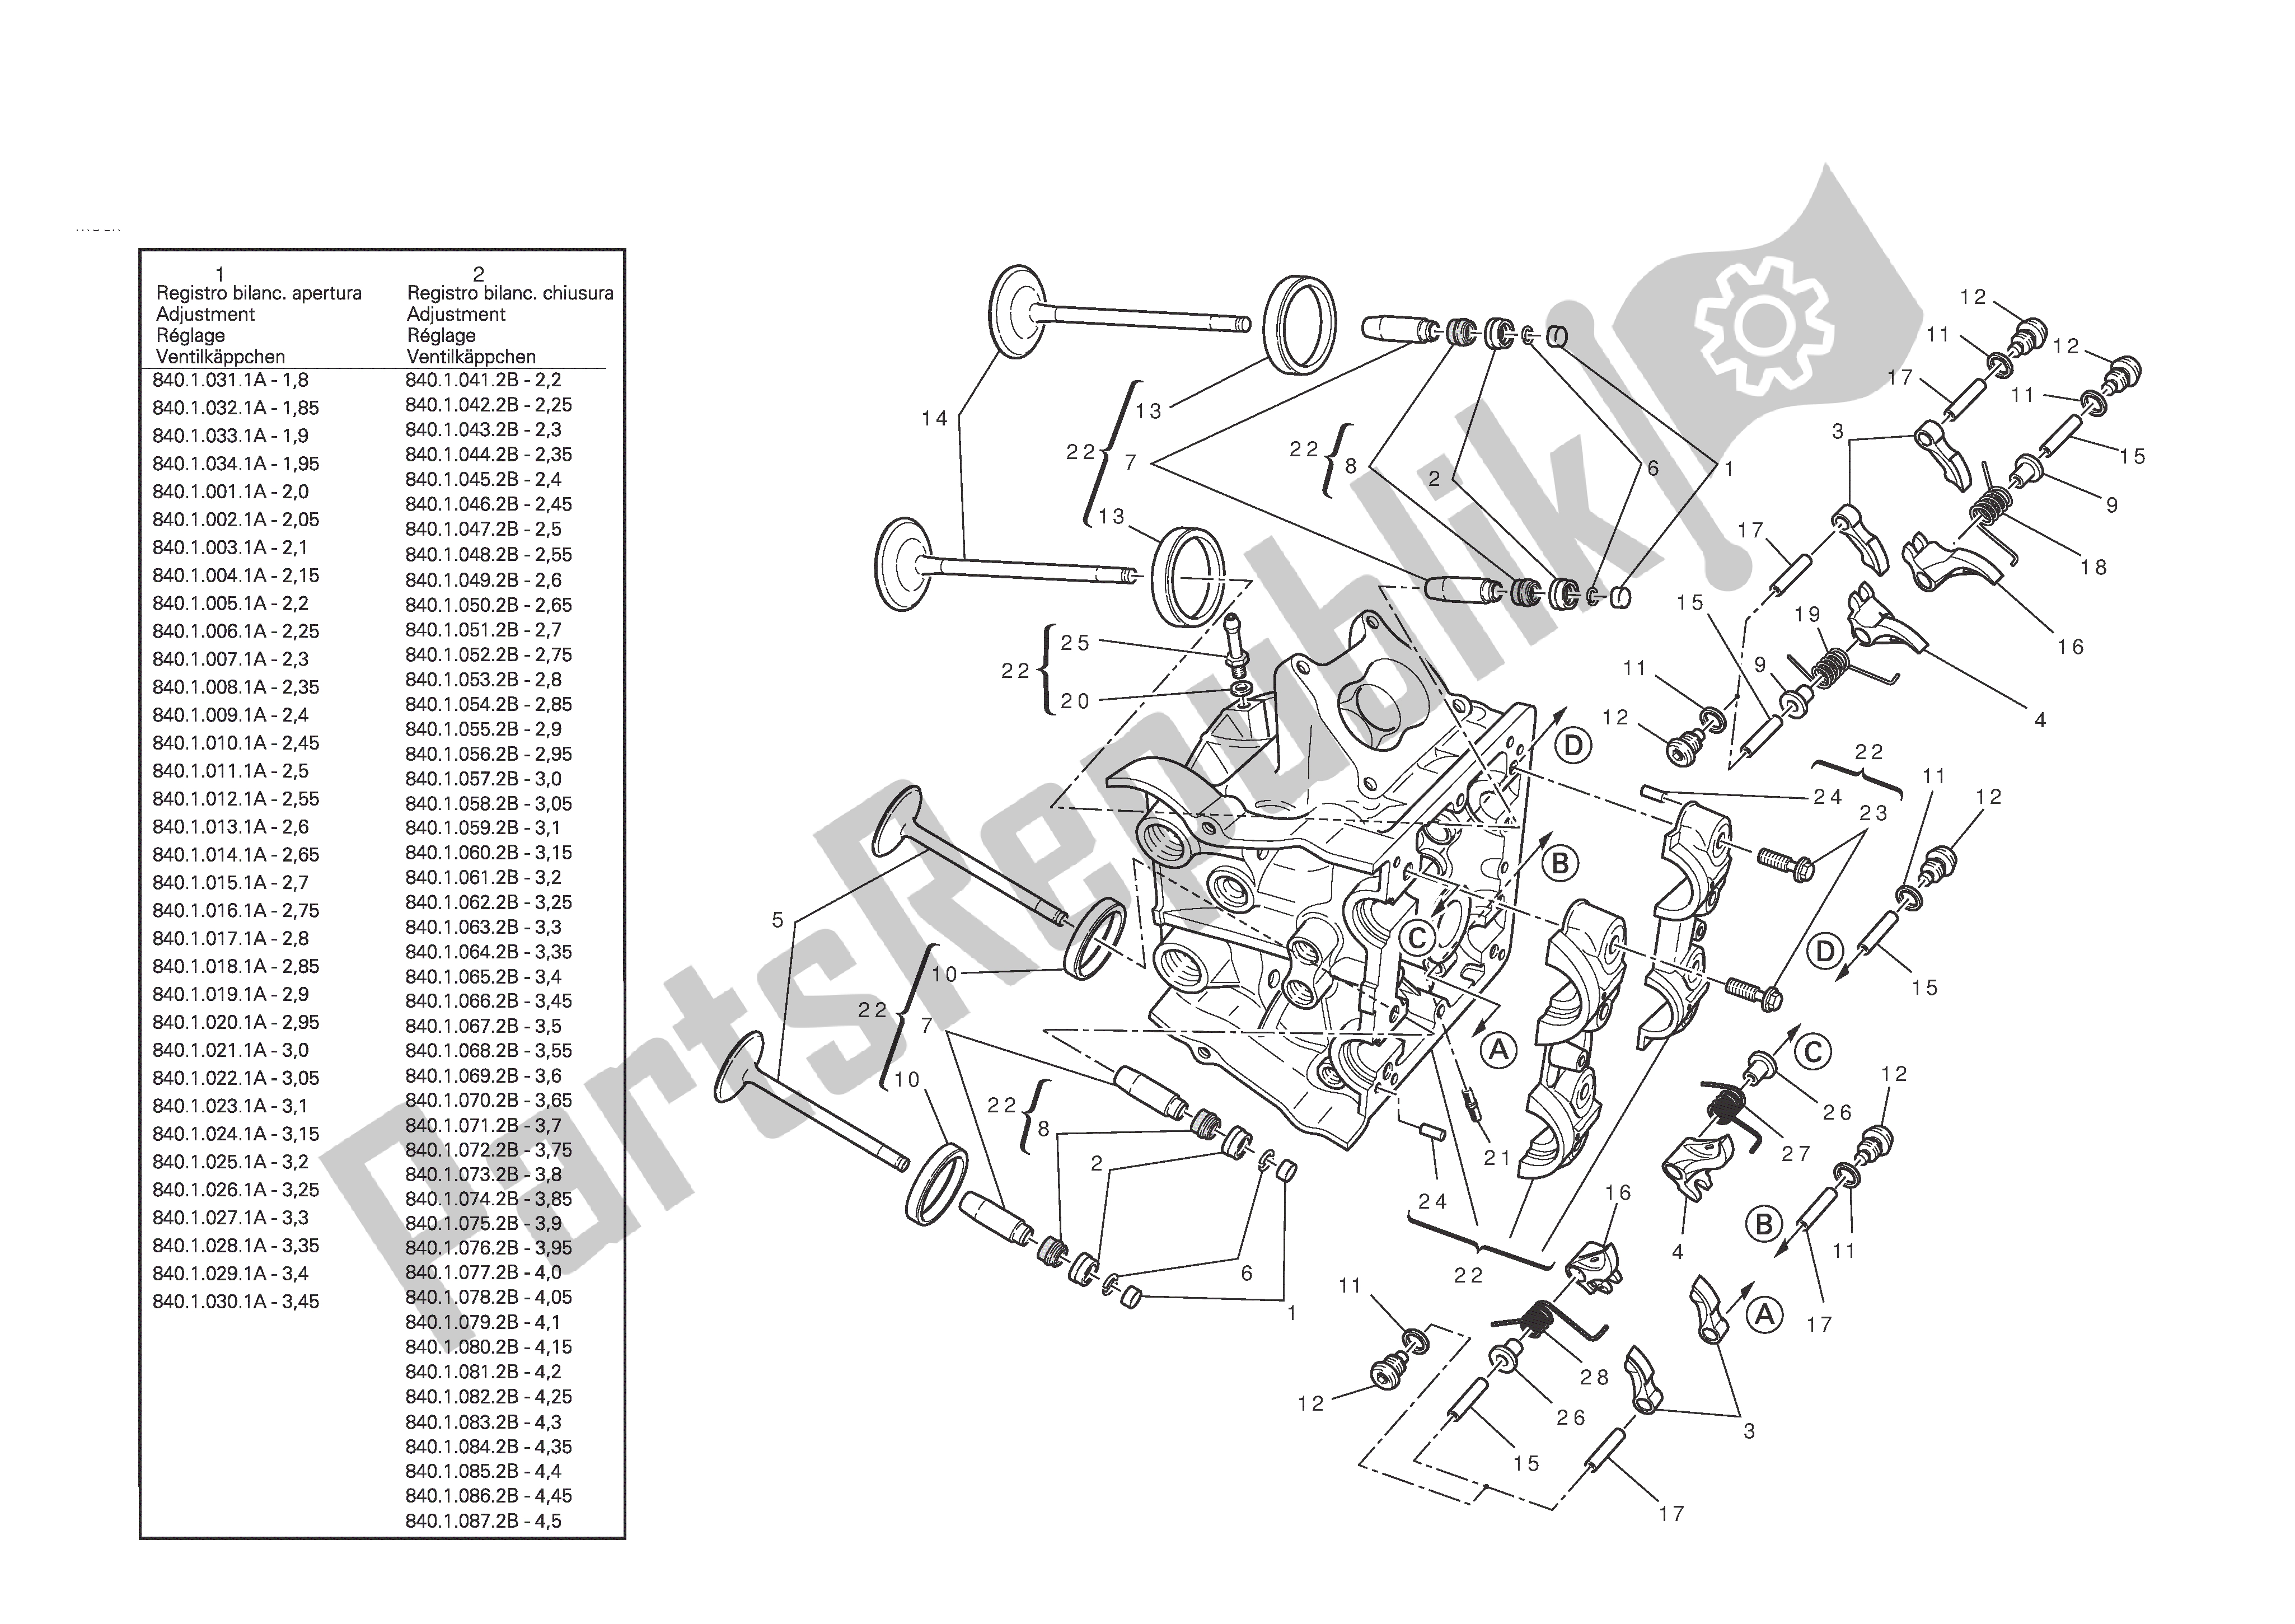 All parts for the Horizontal Cylinder Head of the Ducati Diavel 1200 2011